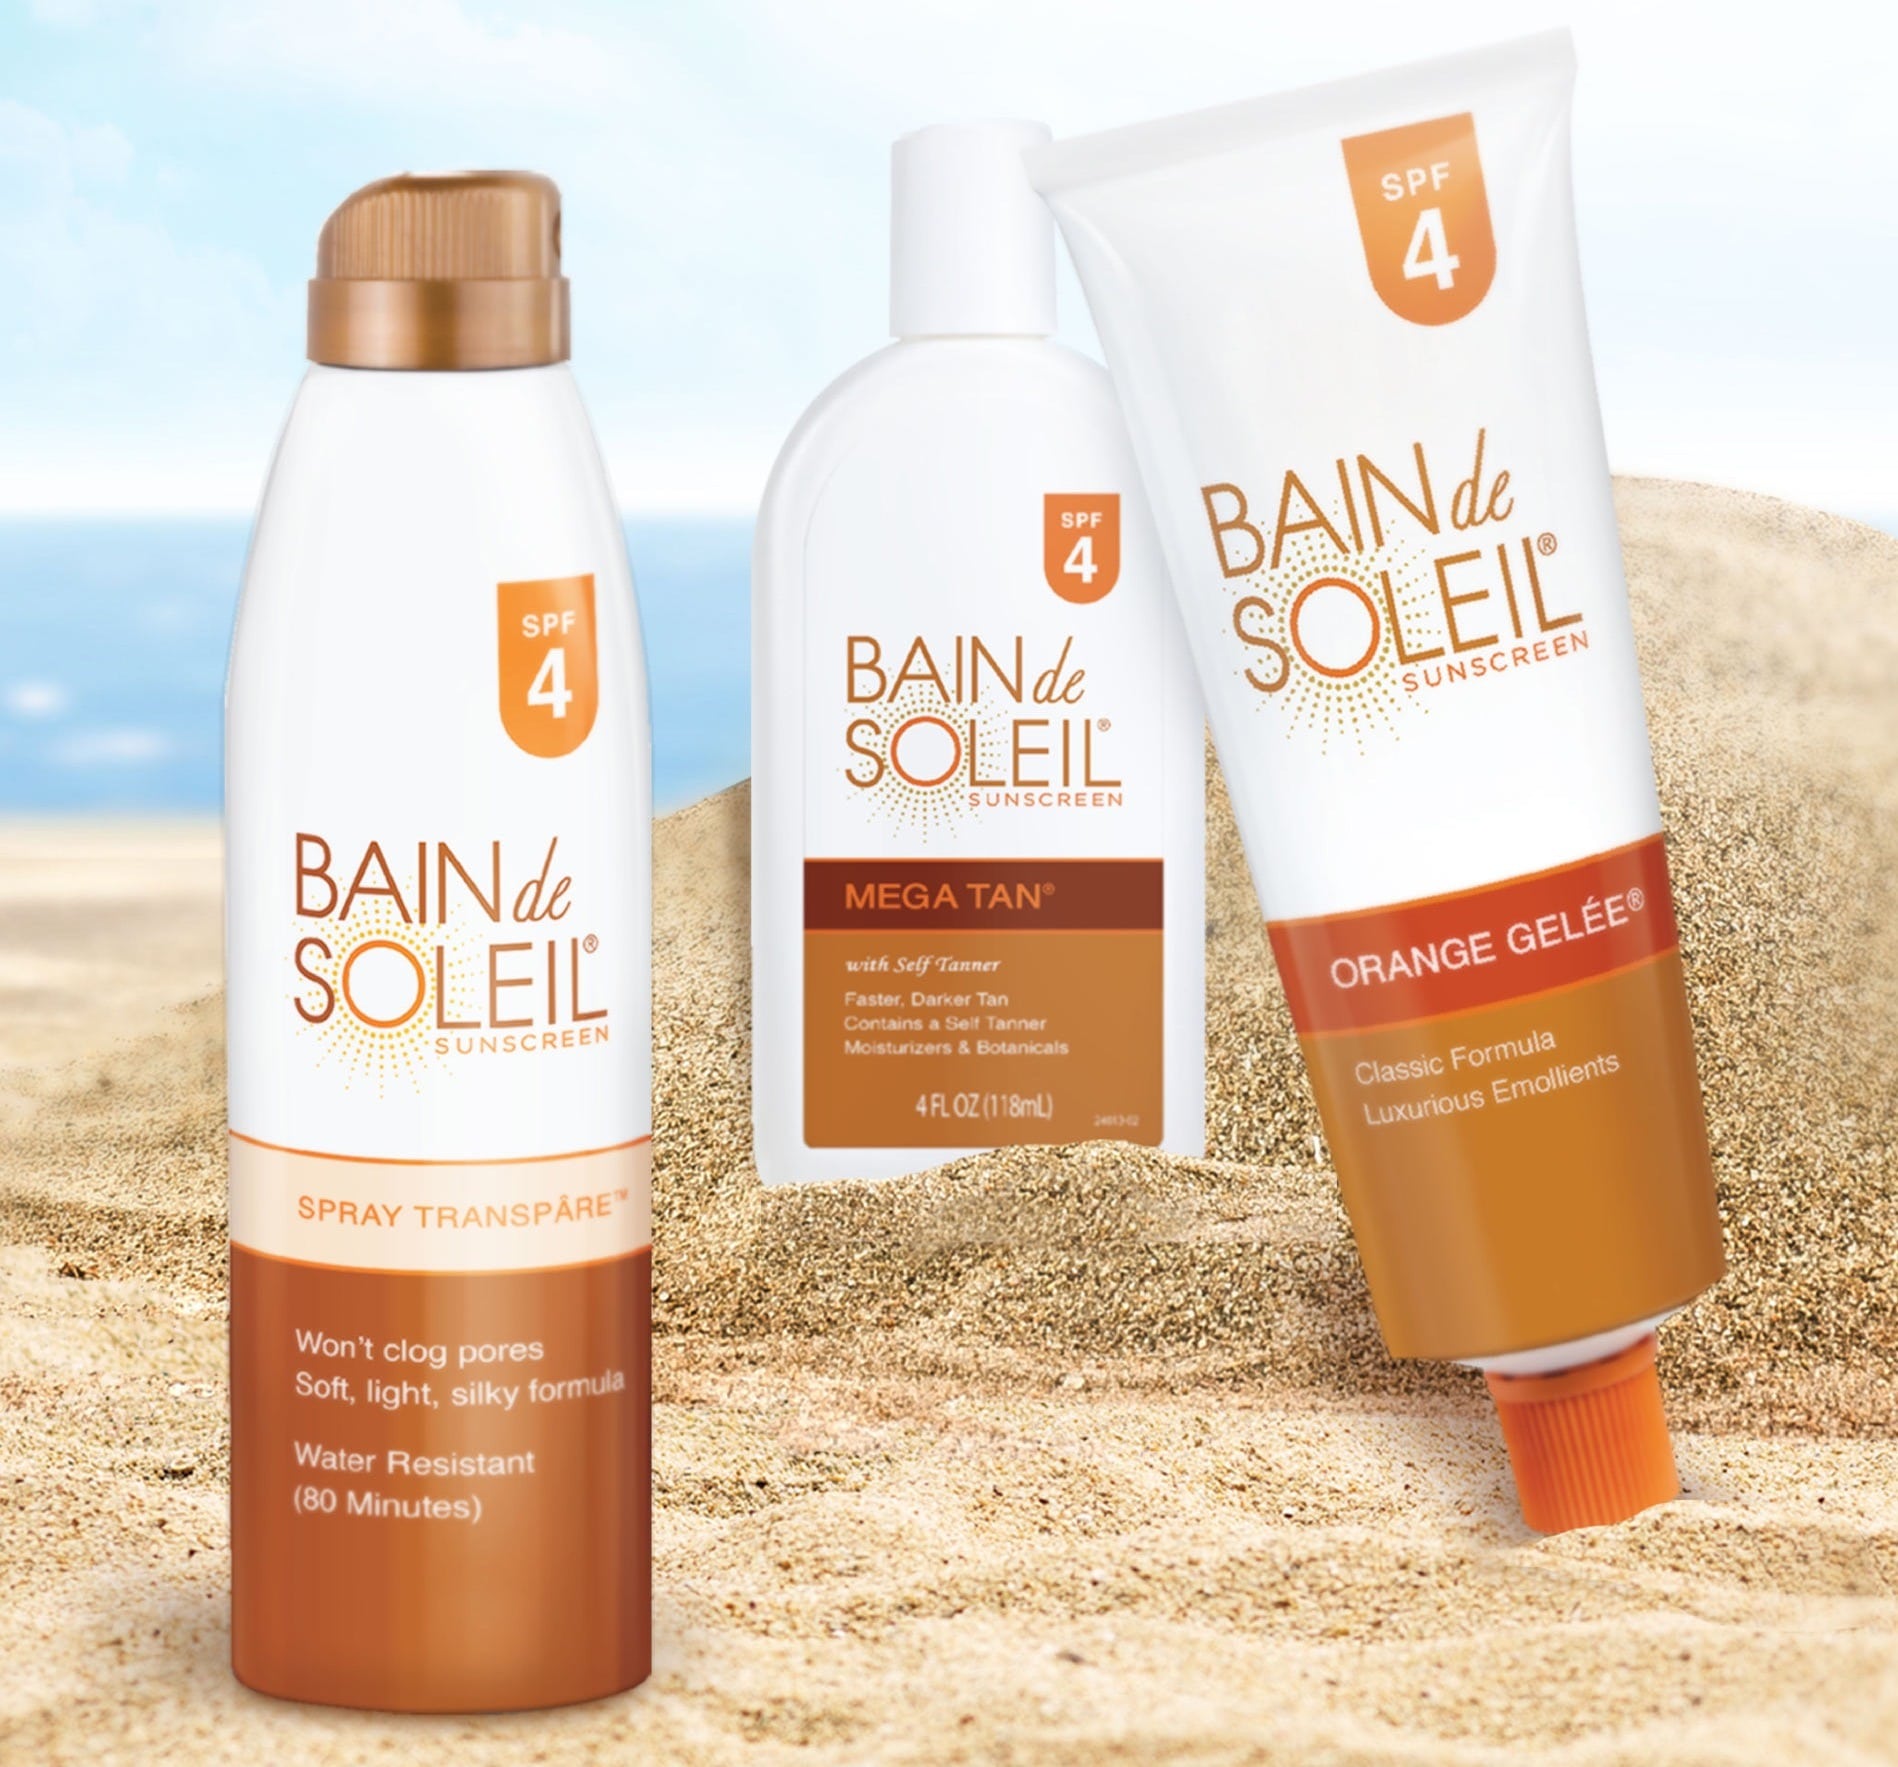 17 Best Sunscreens for Tanning in 2022 - Reviews & Top Picks